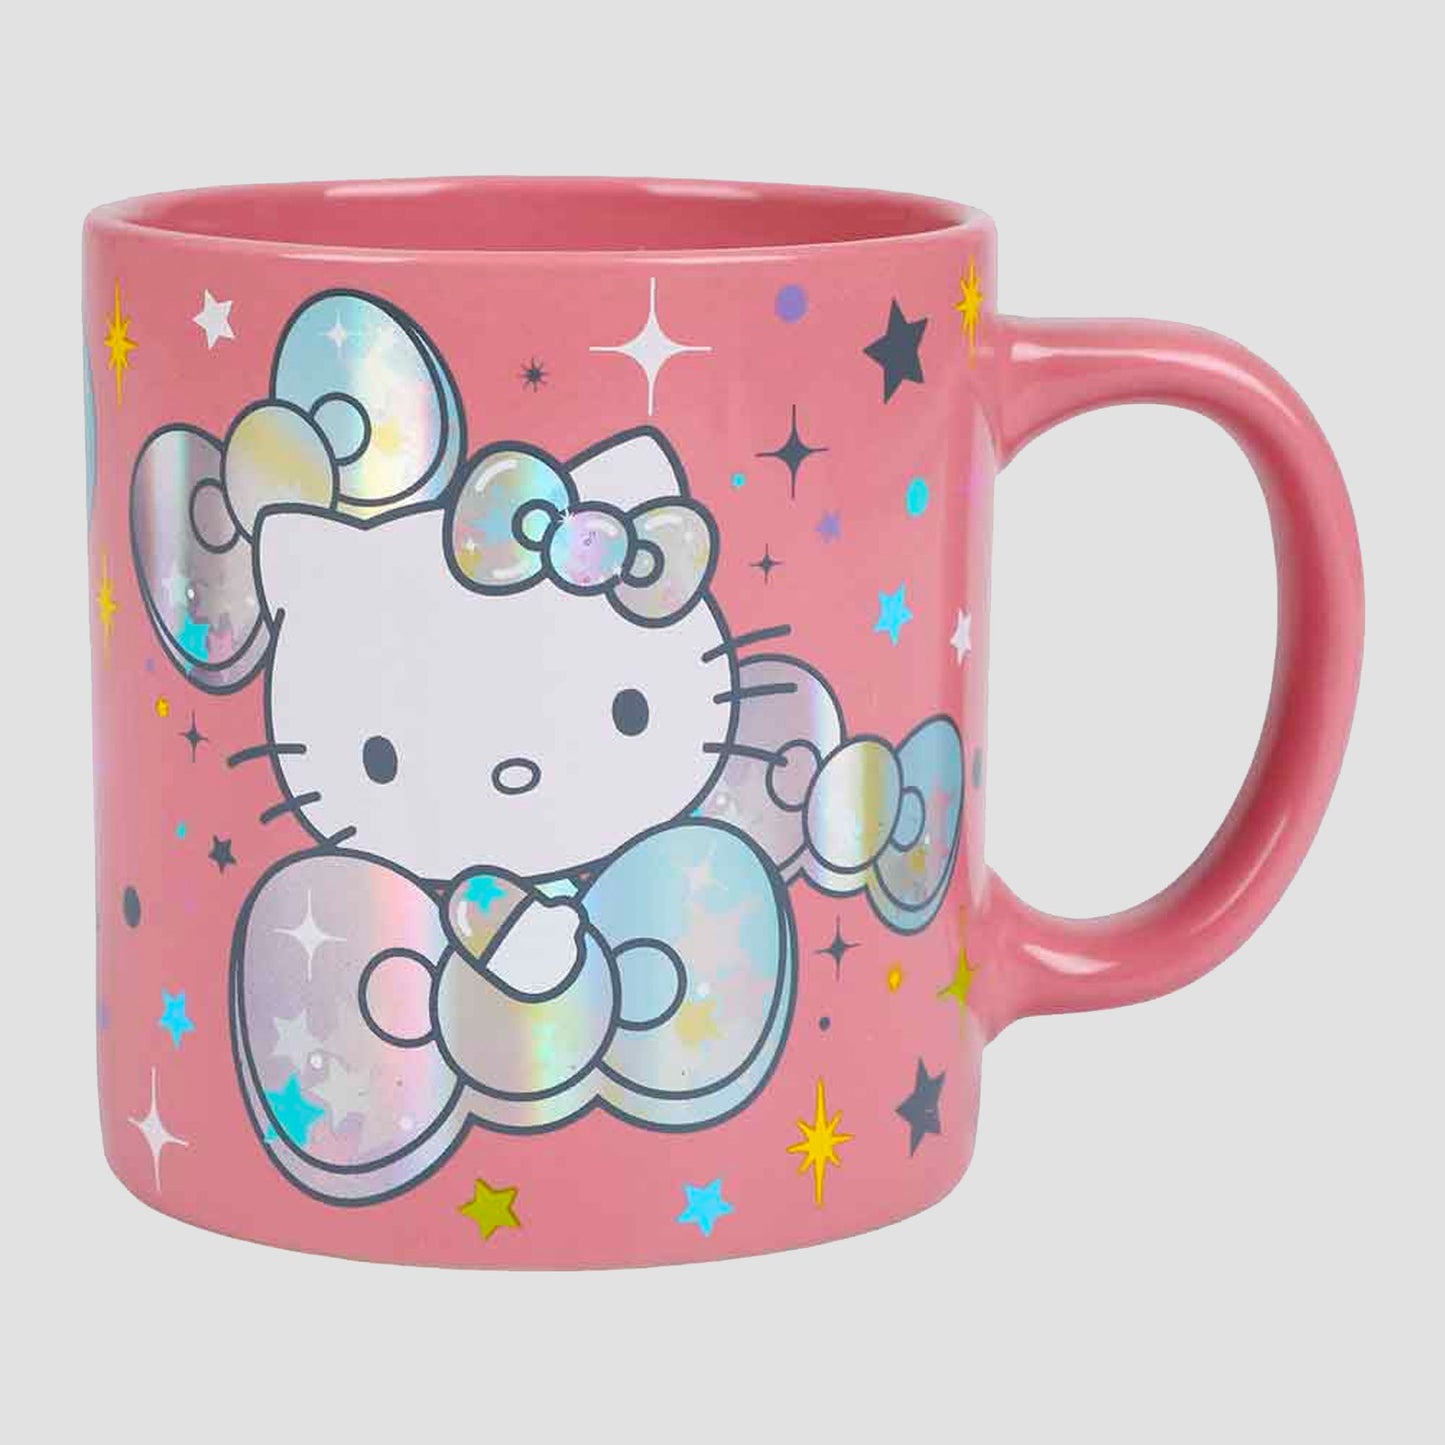 Hello kitty 16oz glass cup | strawberry Sanrio glass cup